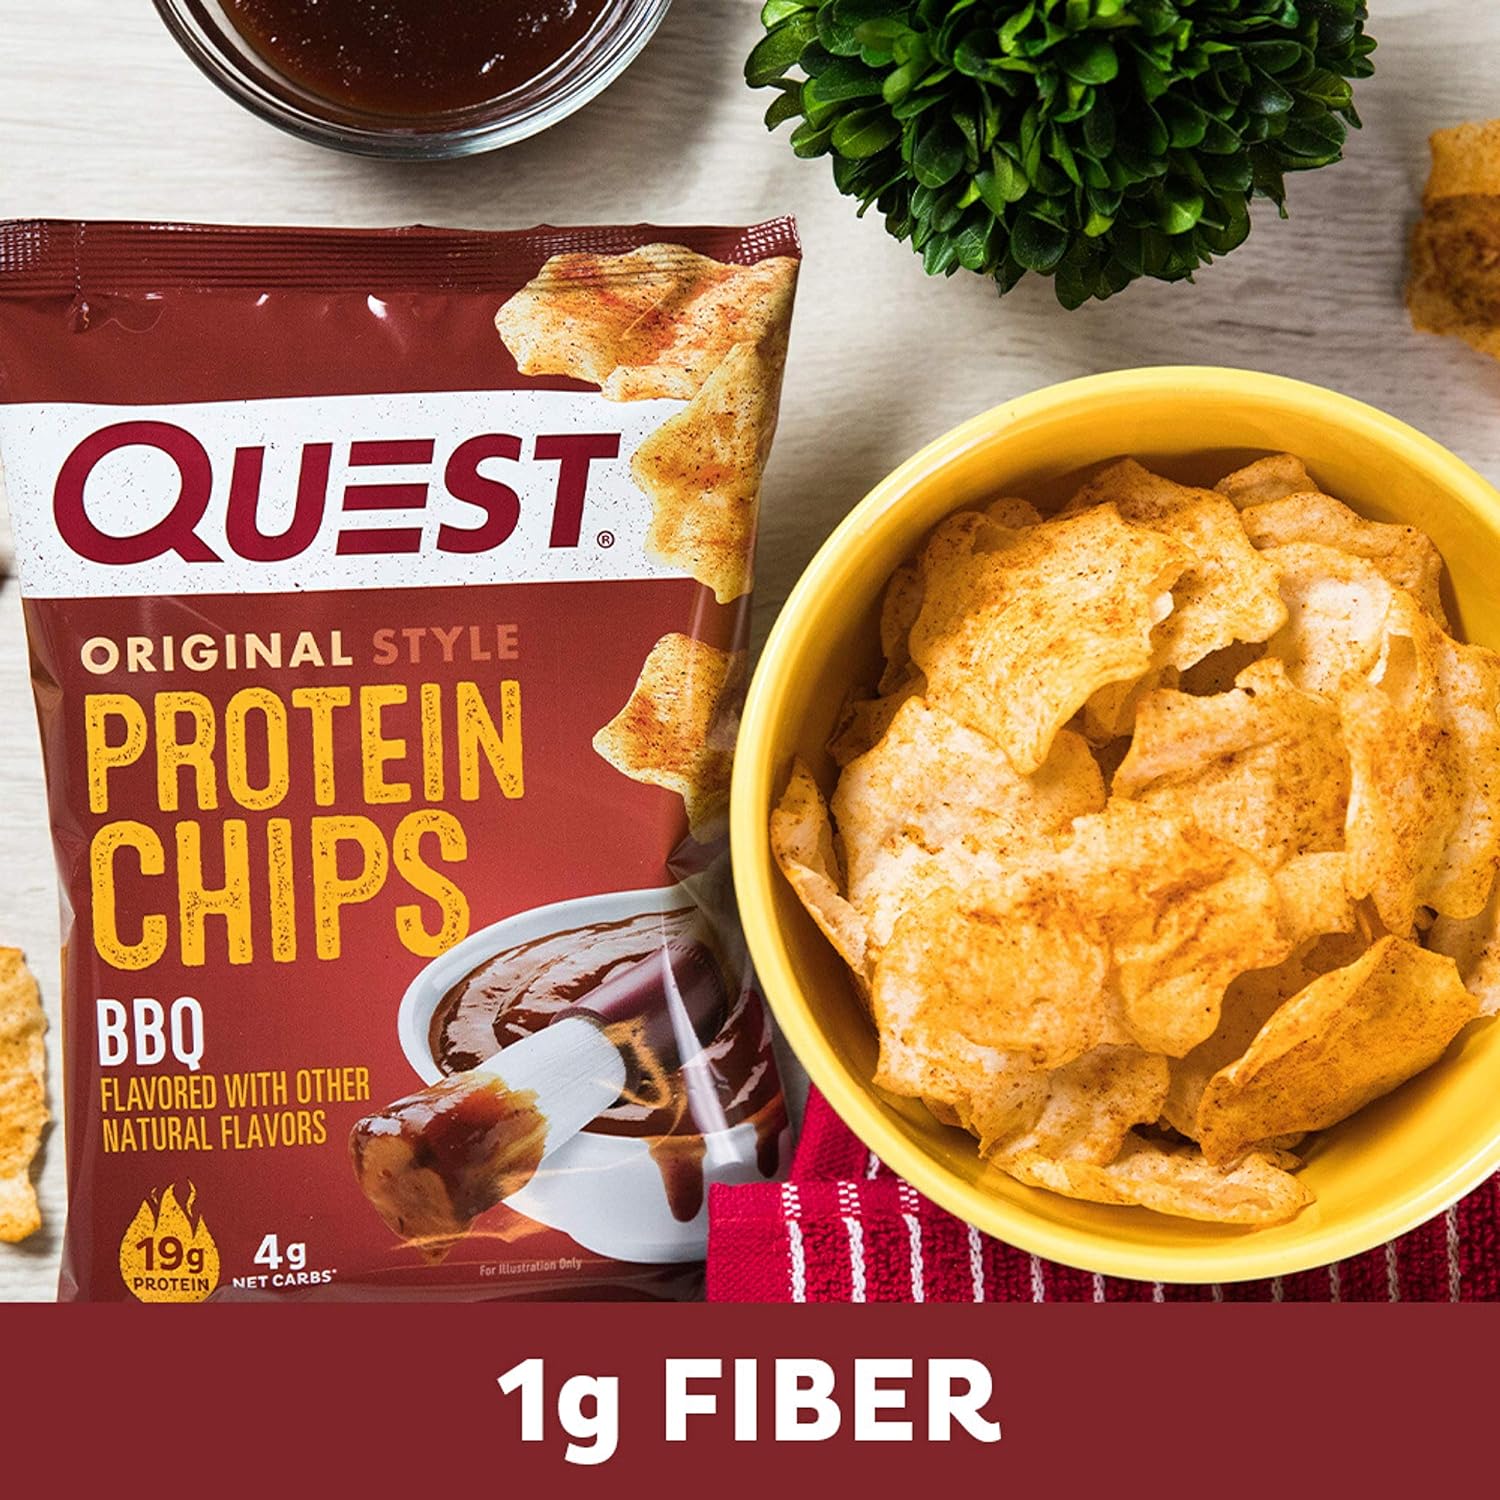 Quest Nutrition Protein Chips, BBQ, High Protein, Low Carb, 1.1 Ounce (Pack of 12)